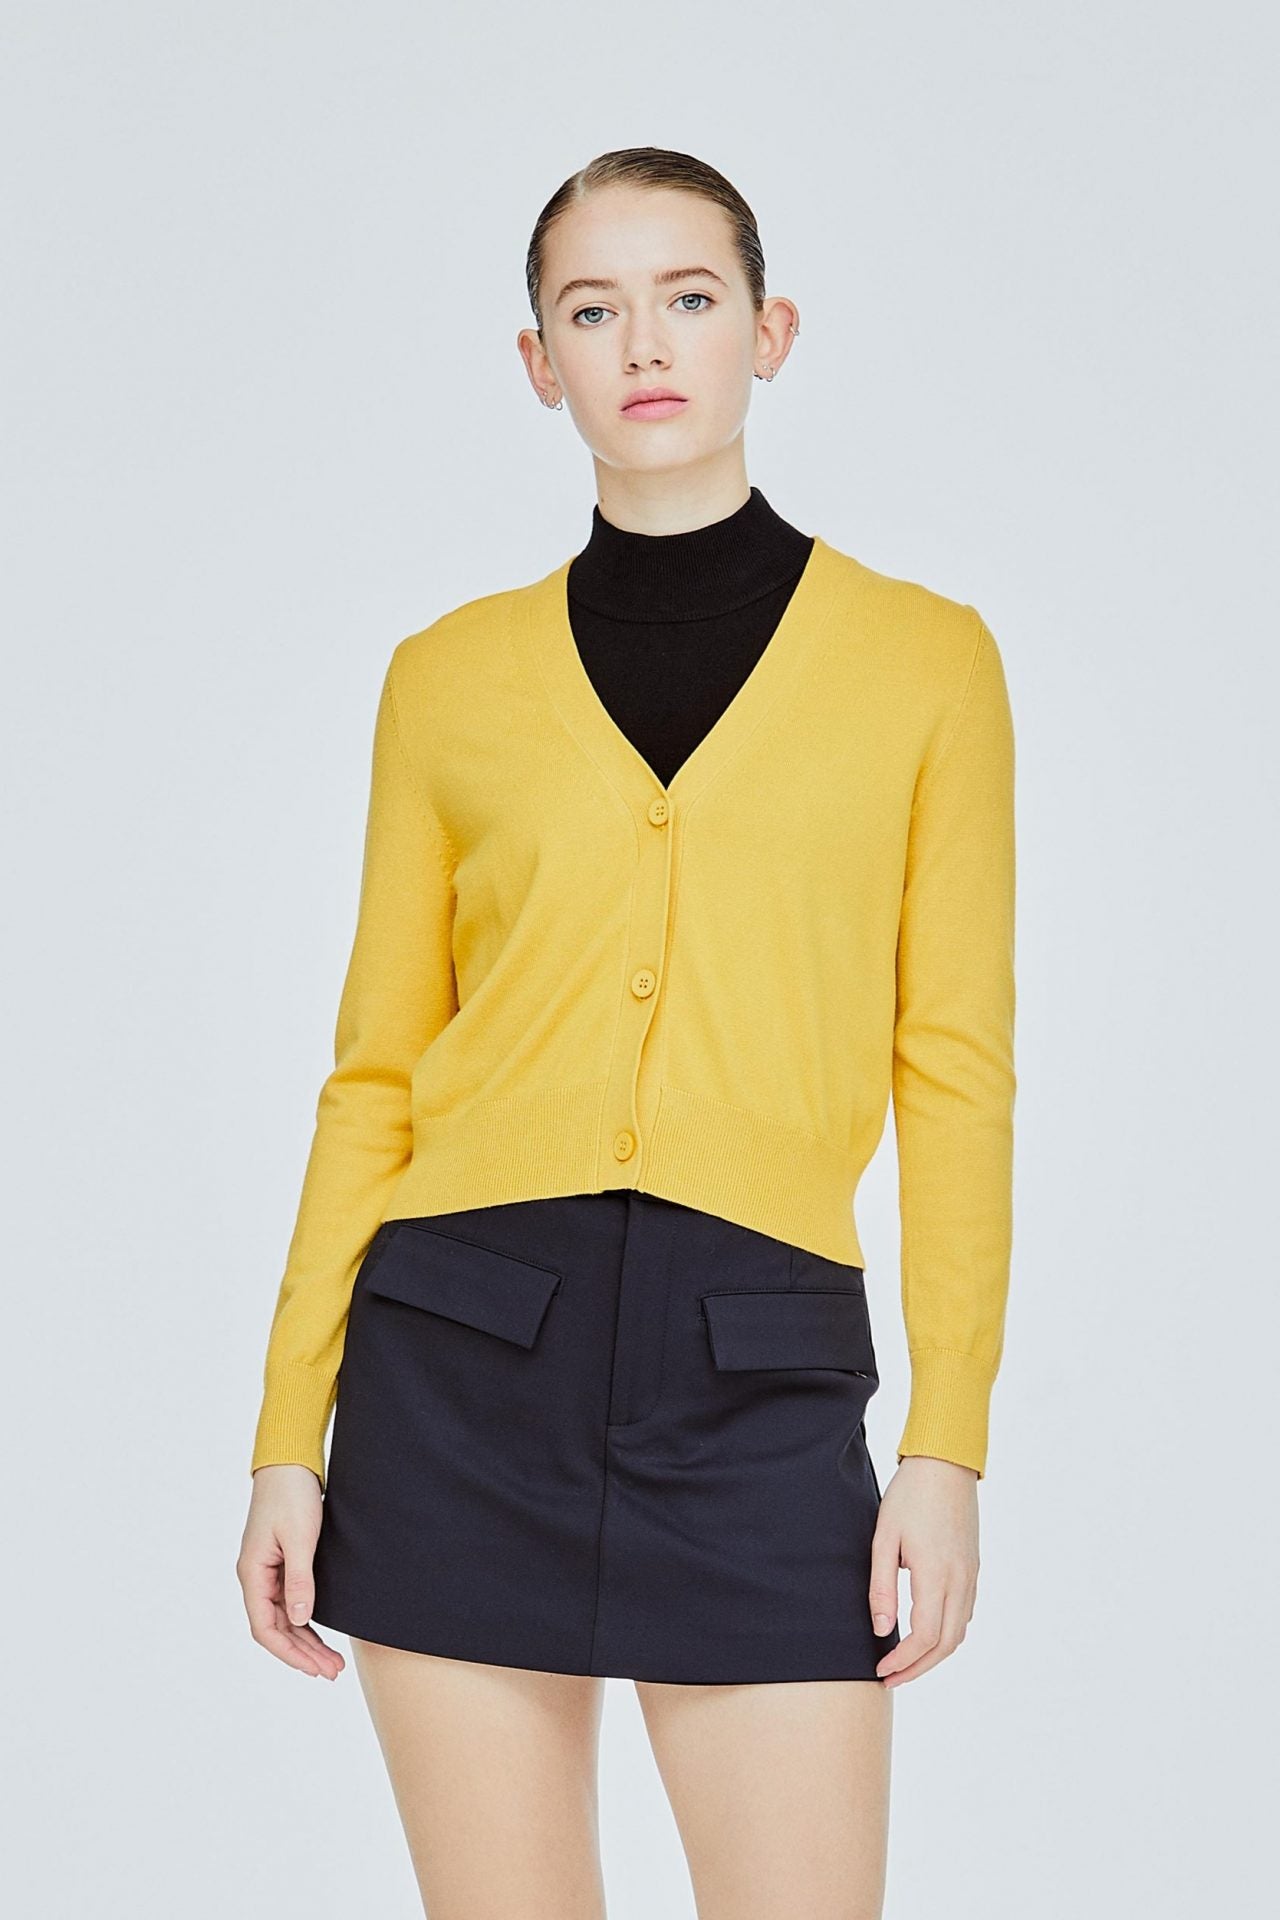 ACL 9995 V NECK CARDIGAN YELLOW-2